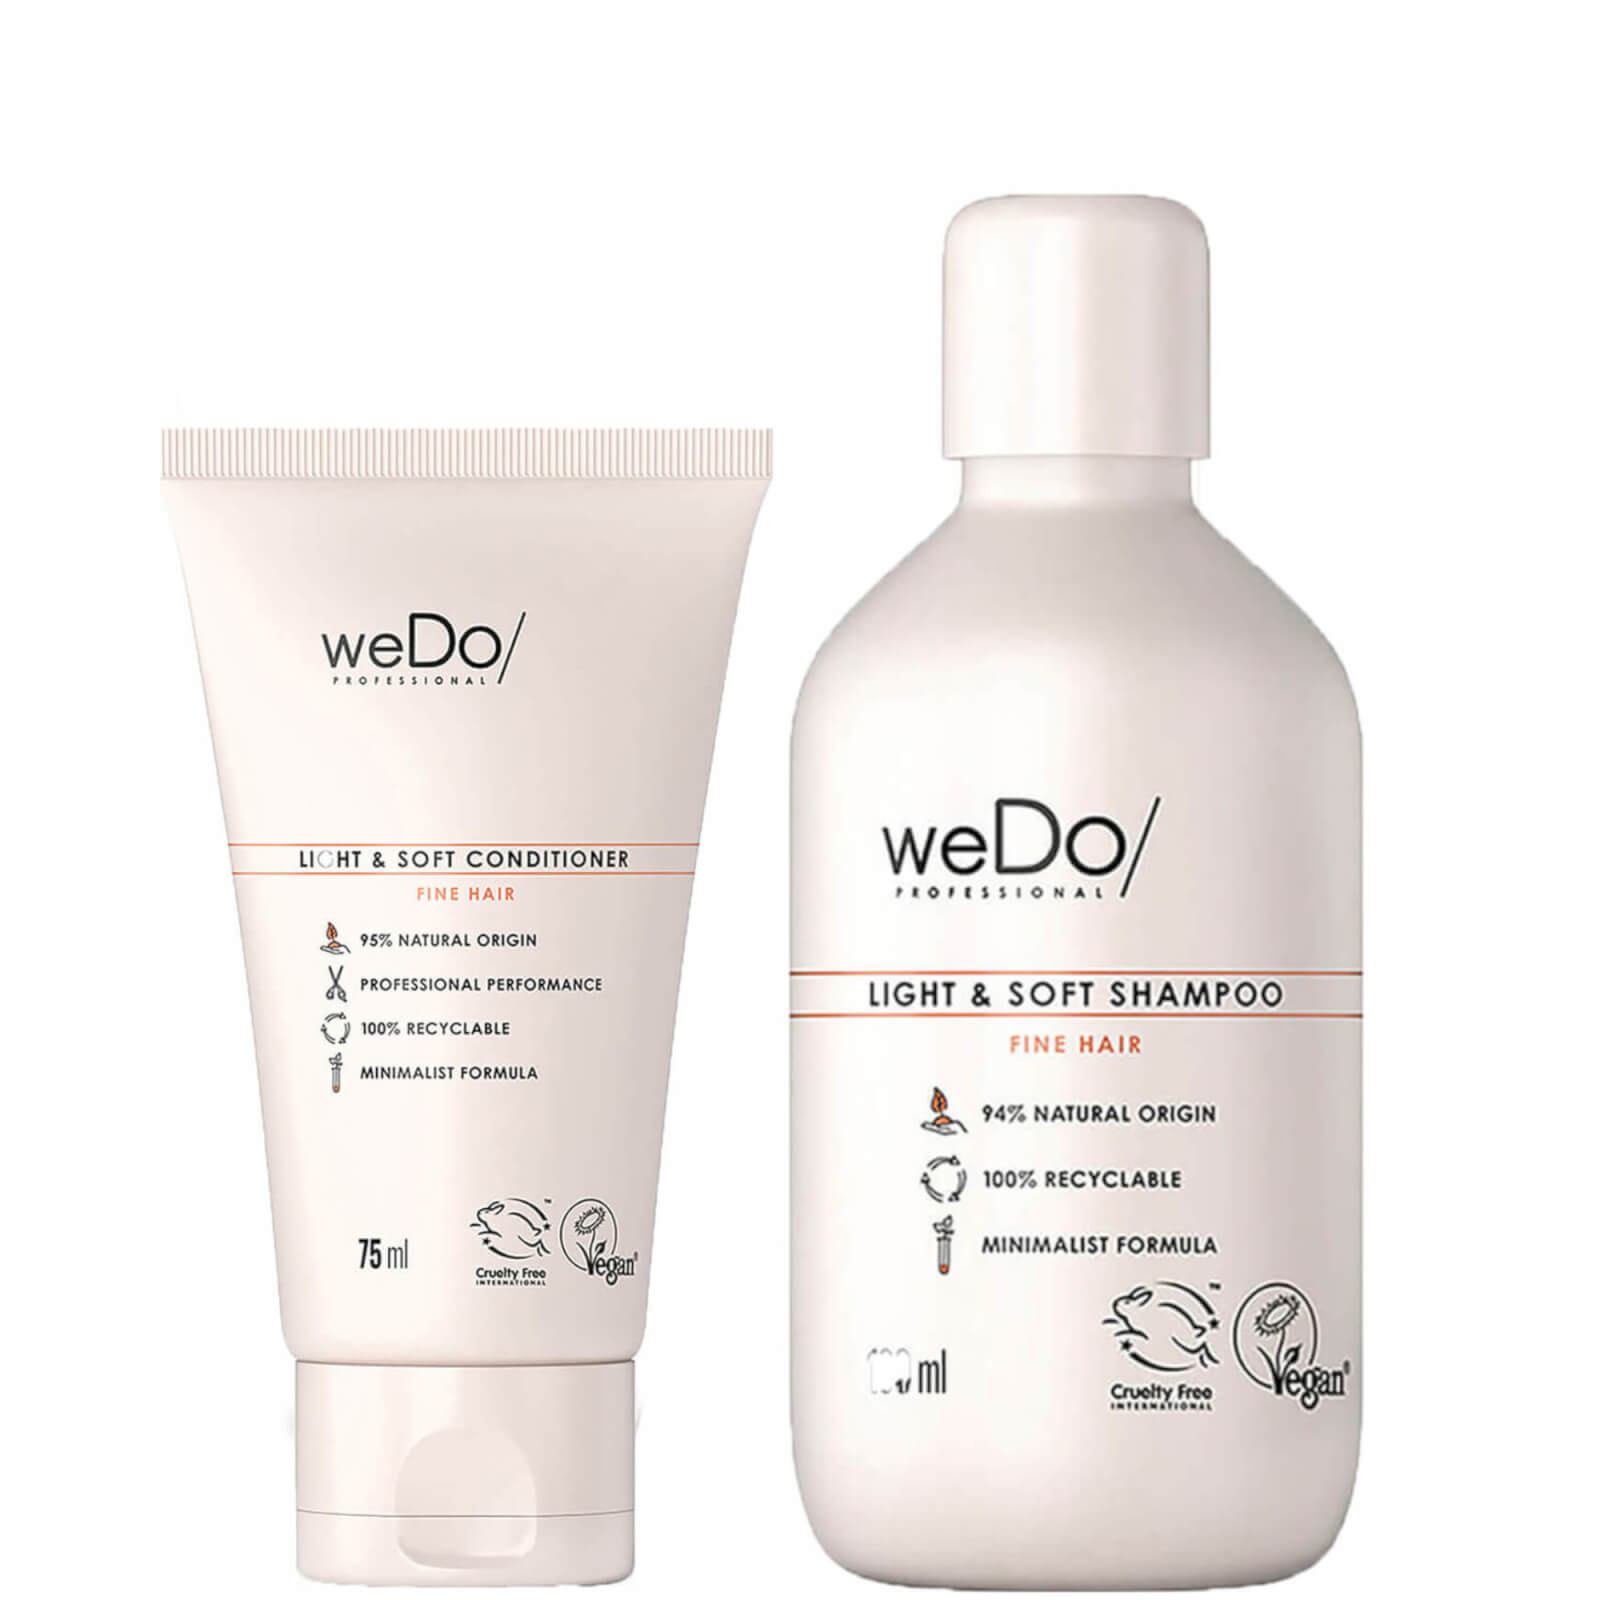 WeDo/ Professional Light and Soft Shampoo and Conditioner Trial Regime Bundle